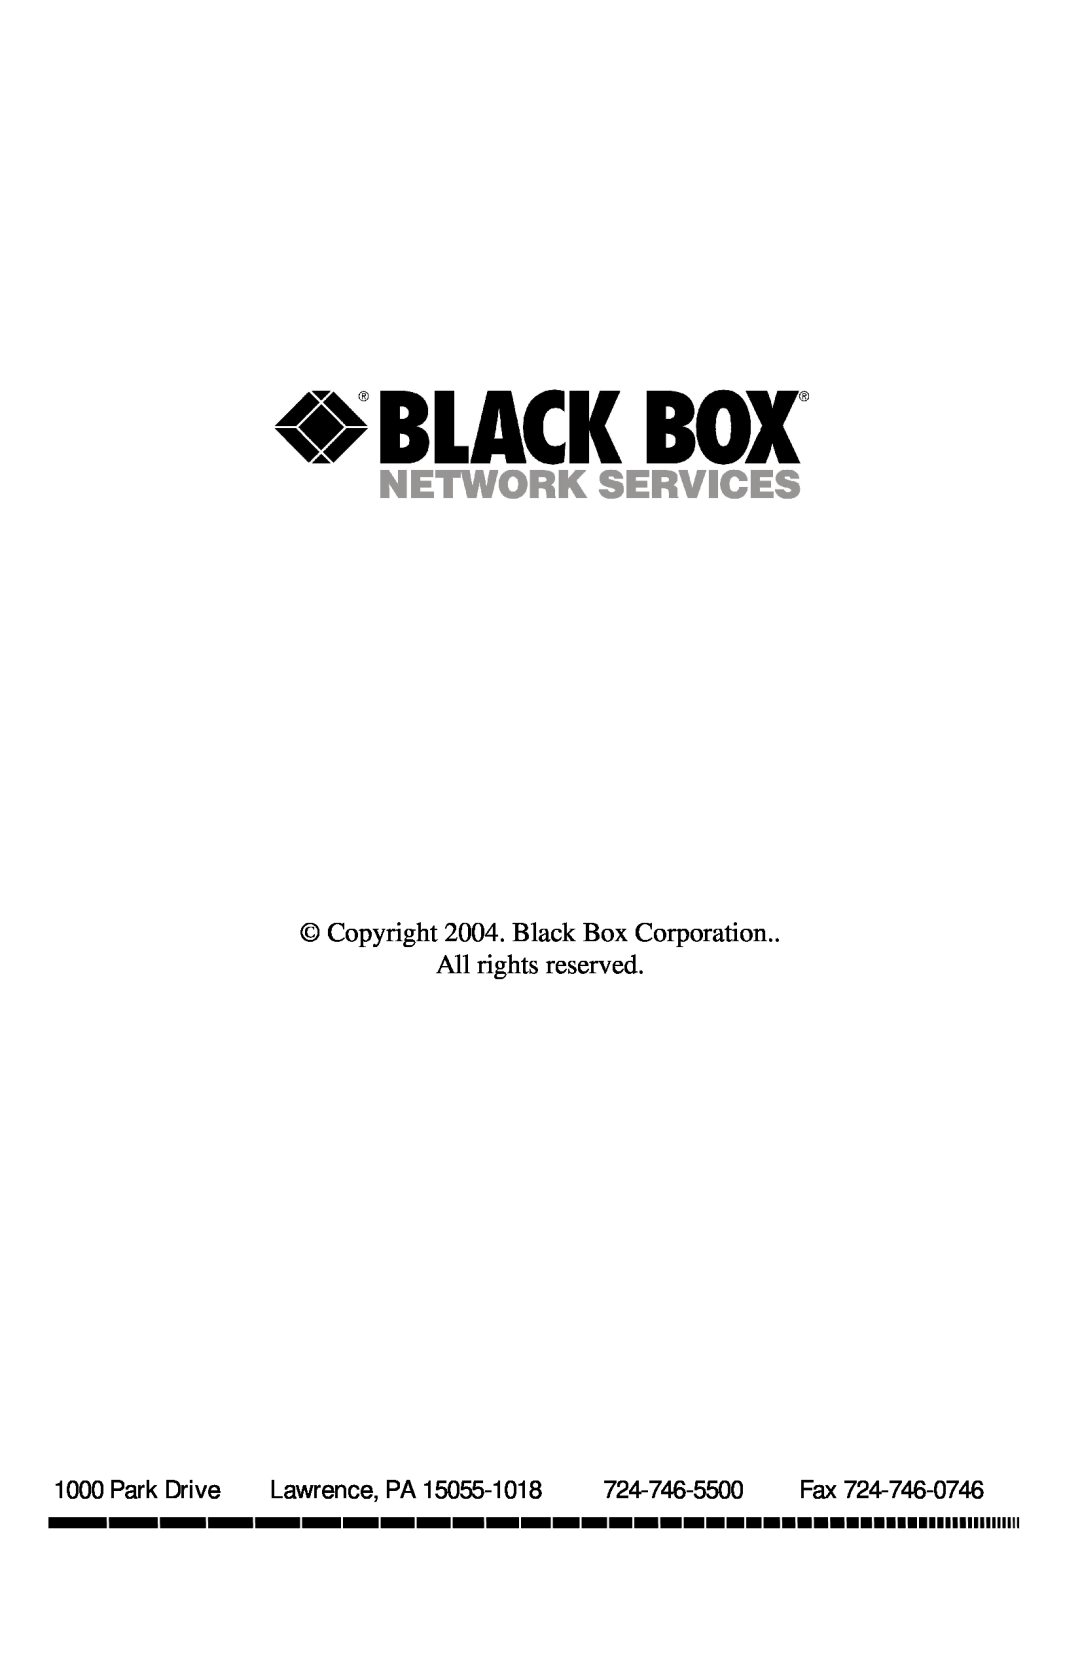 Black Box AC506A manual Copyright 2004. Black Box Corporation All rights reserved, Park Drive, Lawrence, PA 